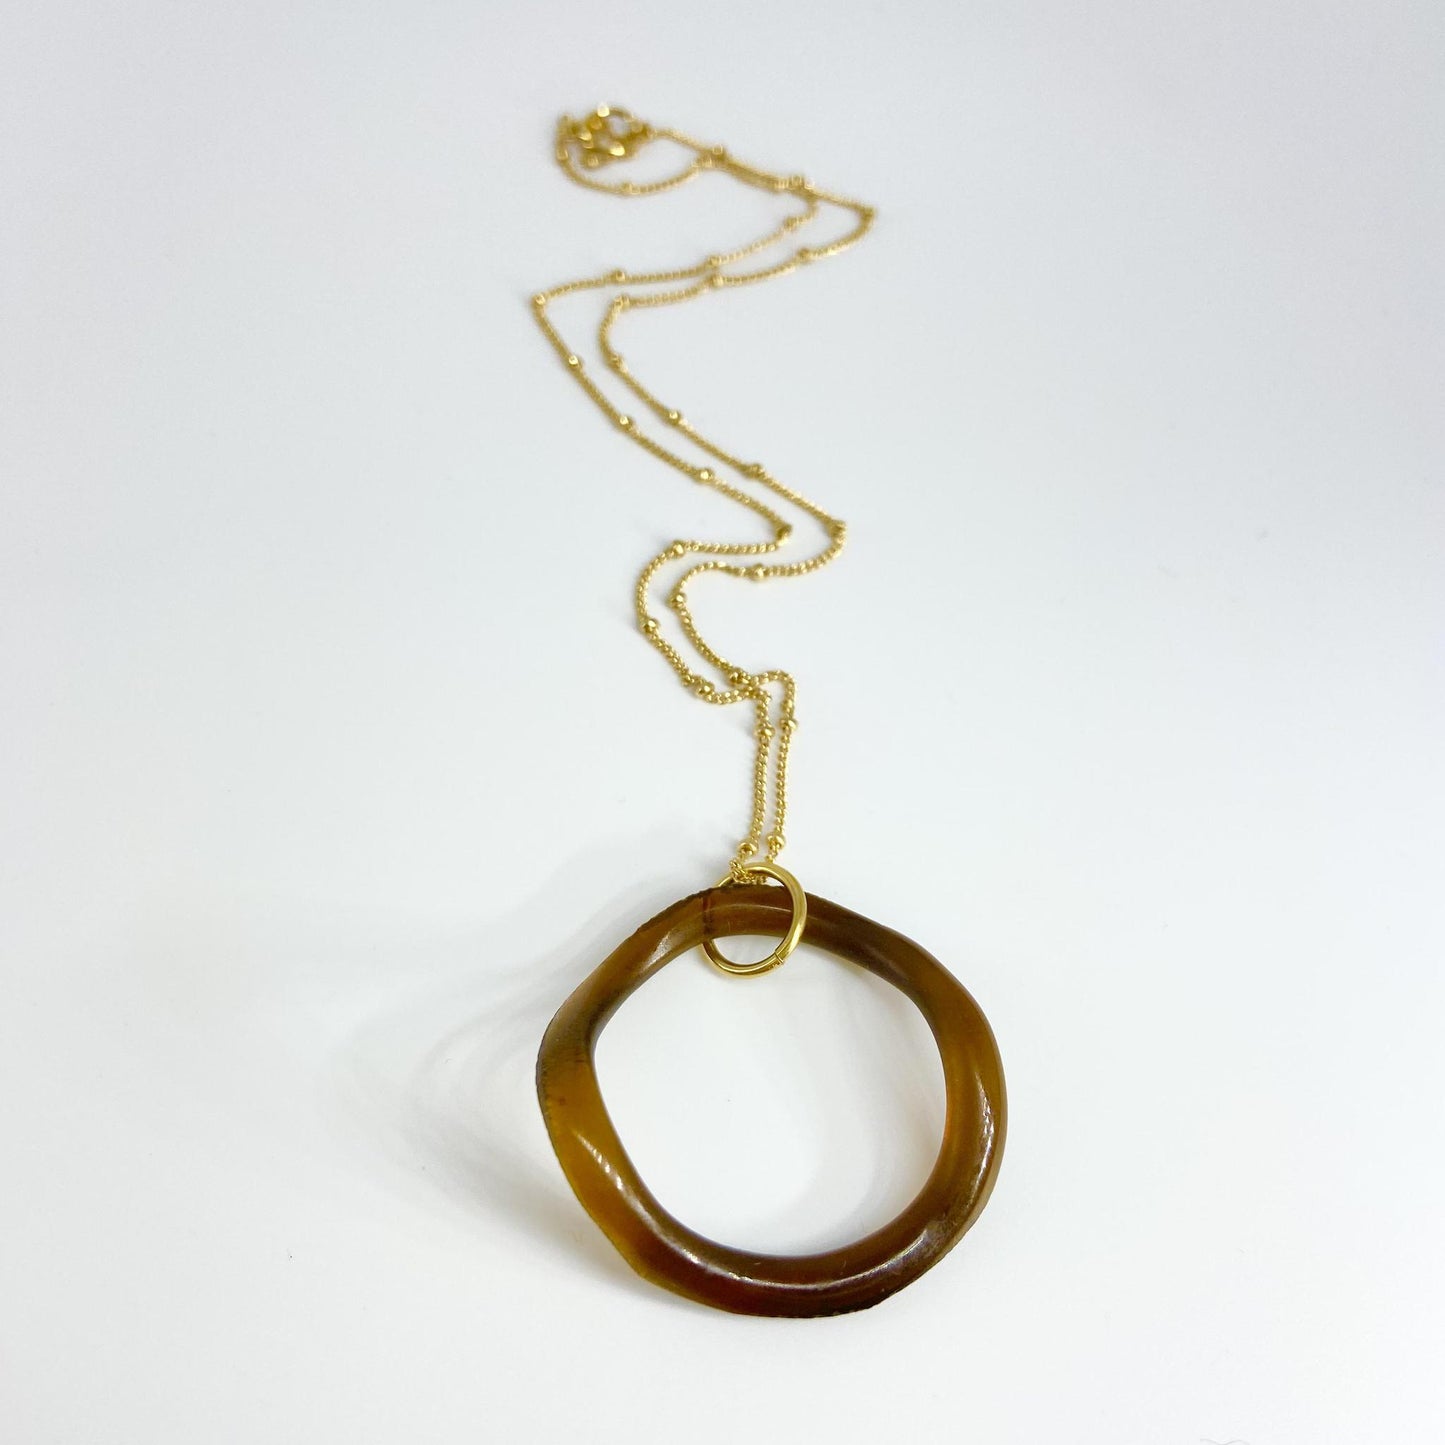 Necklace - Ruffled Glass Circle - 14kt Goldfill - Amber